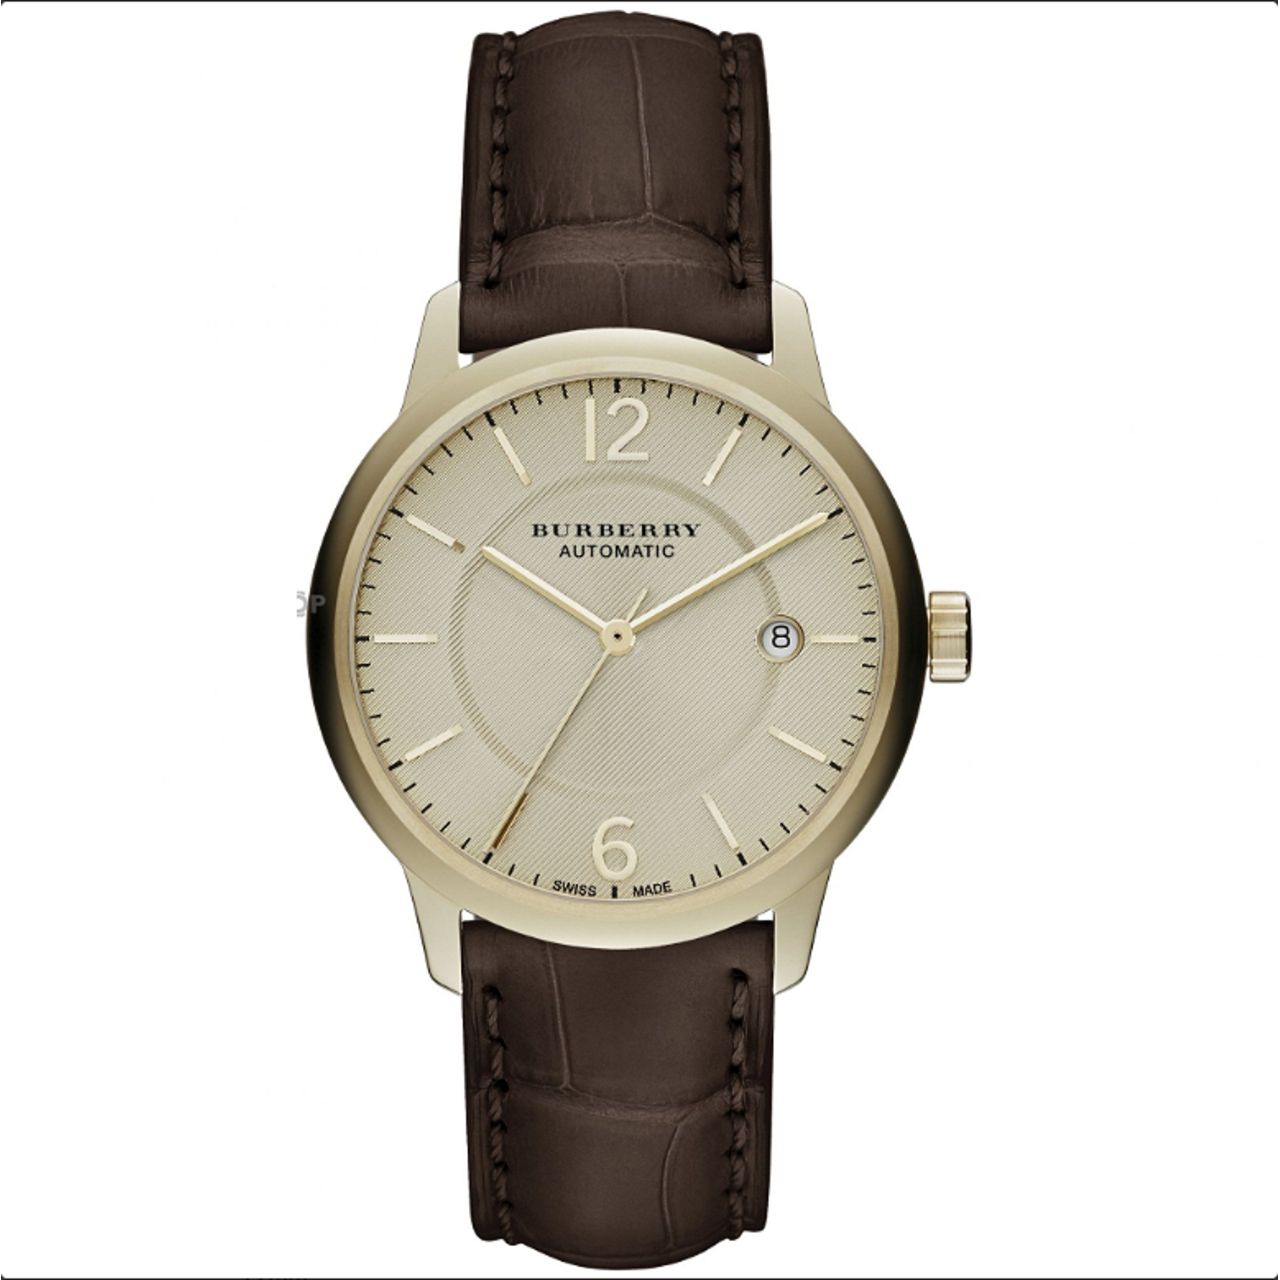 BURBERRY MEN'S THE CLASSIC ROUND AUTOMATIC WATCH BU10302